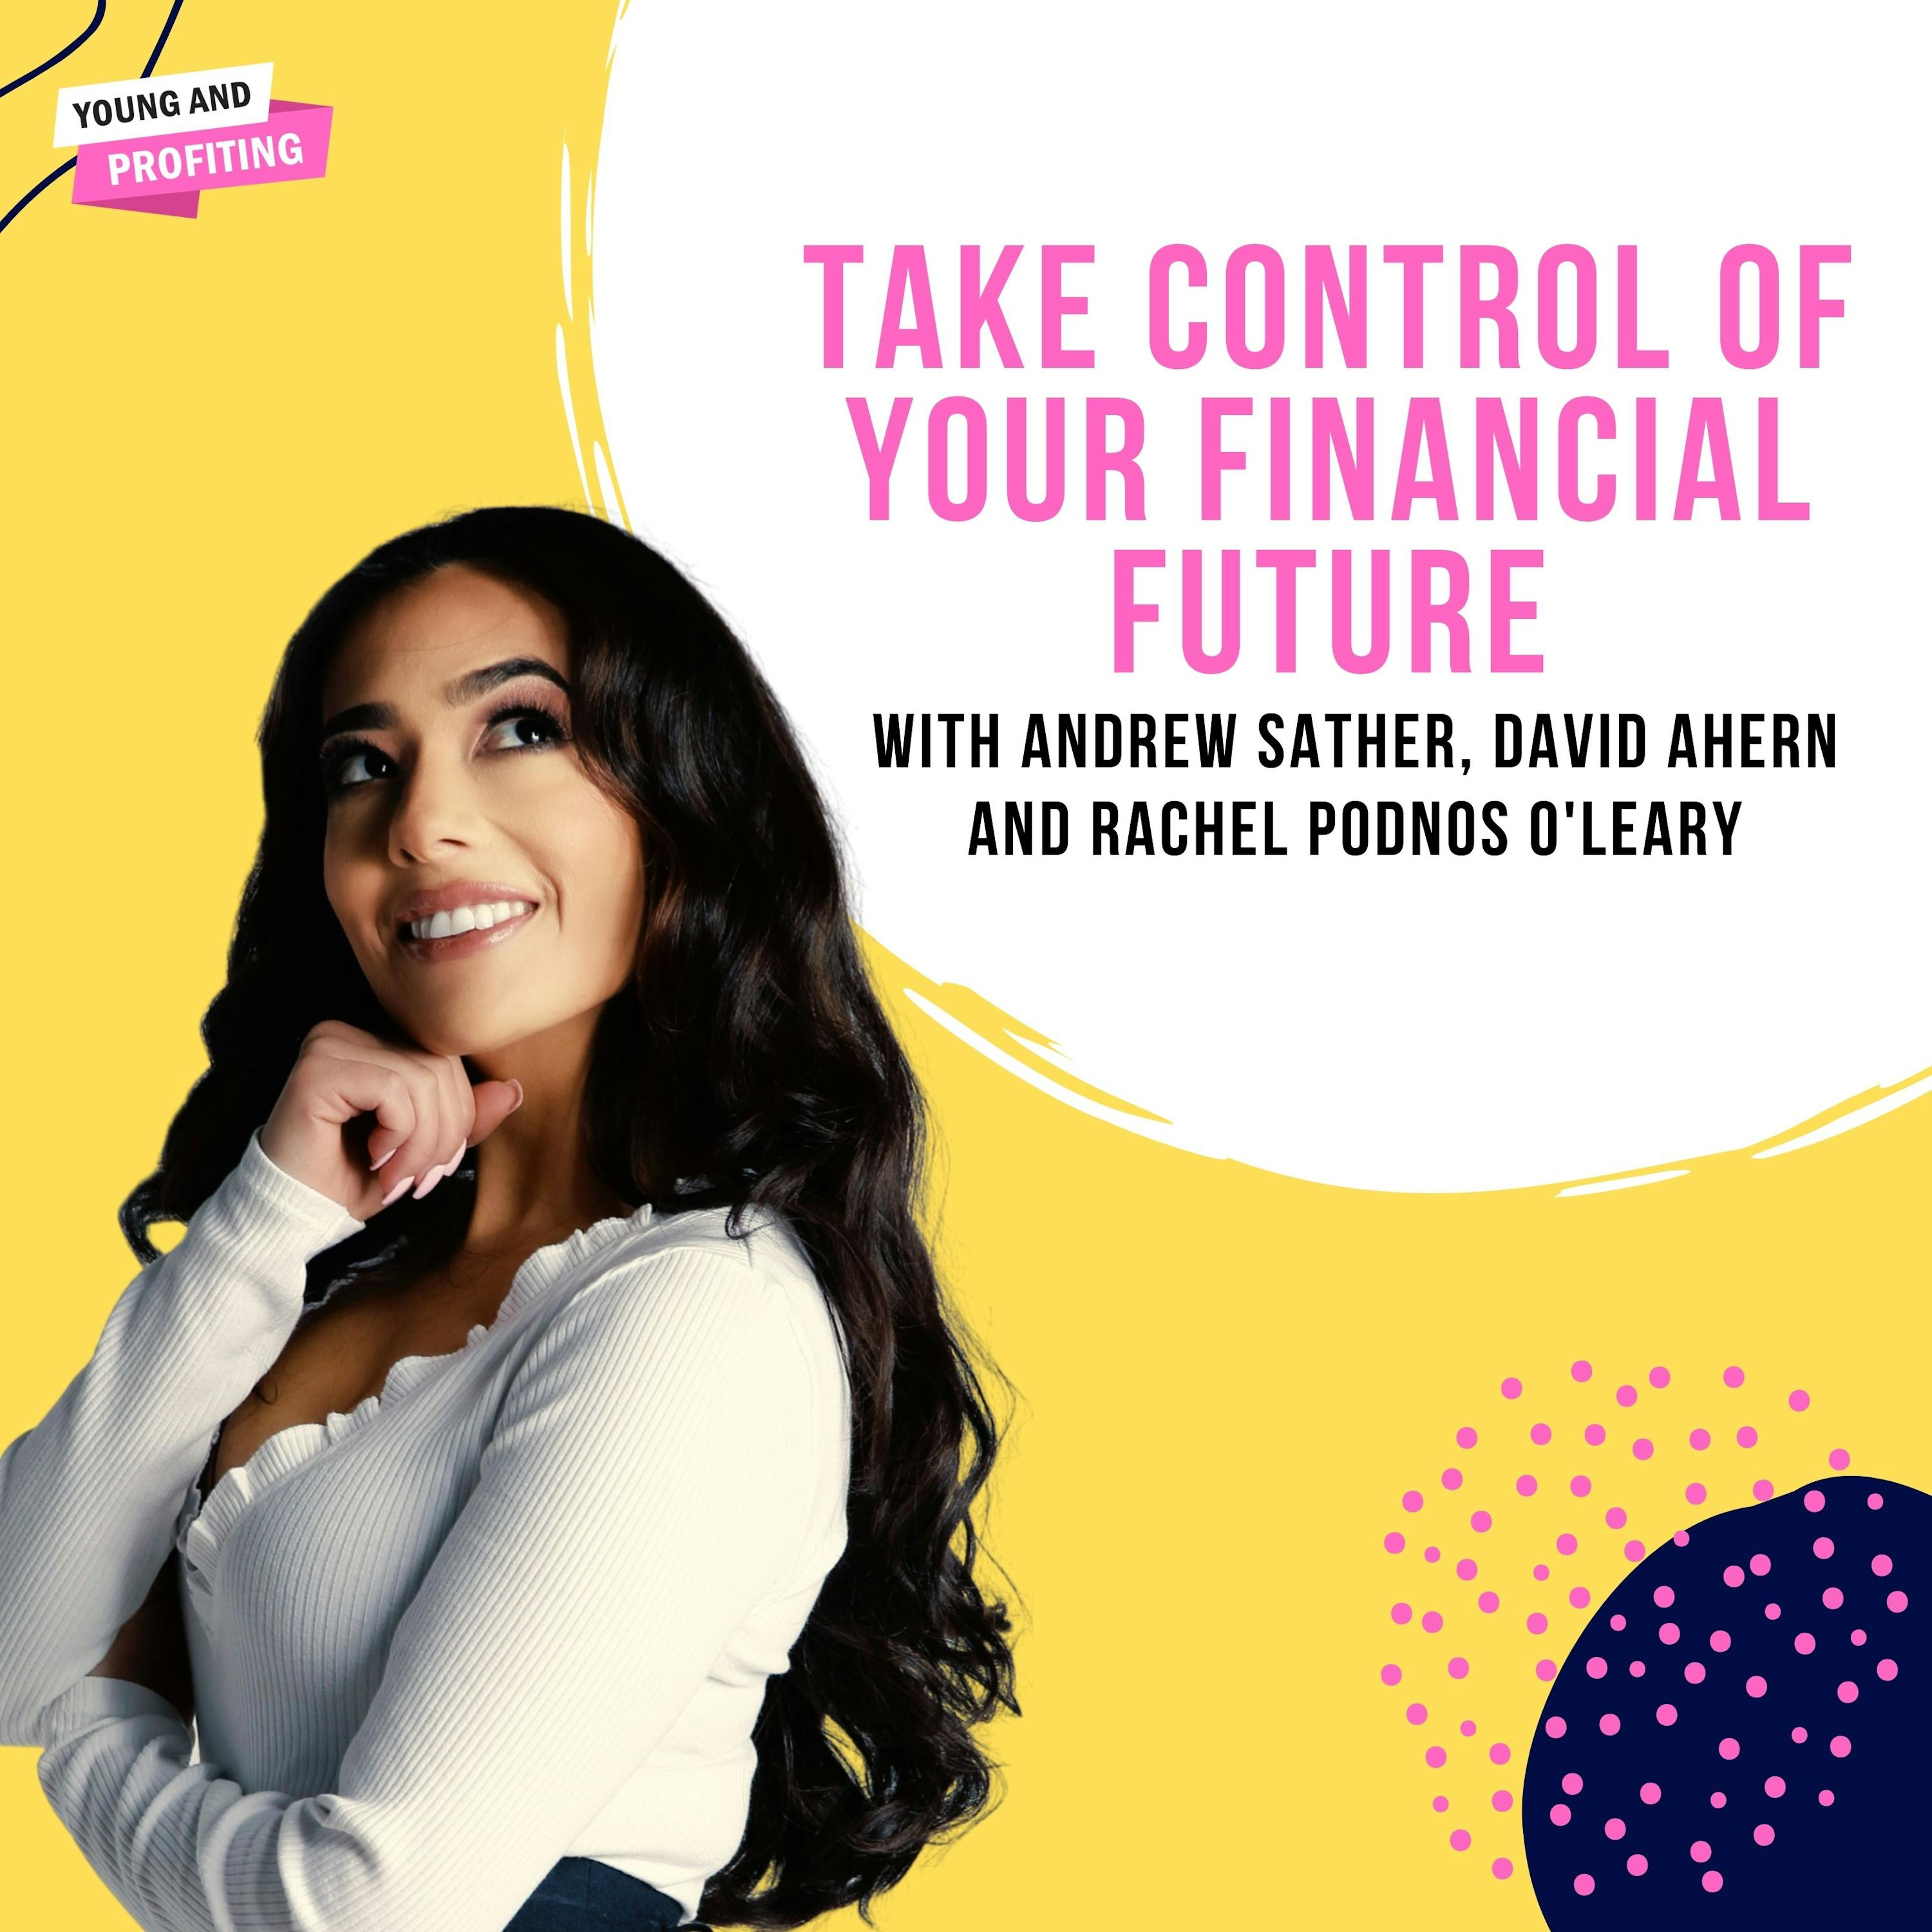 YAPLive: Take Control Of Your Financial Future with Andrew Sather, David Ahern and Rachel Podnos O'Leary